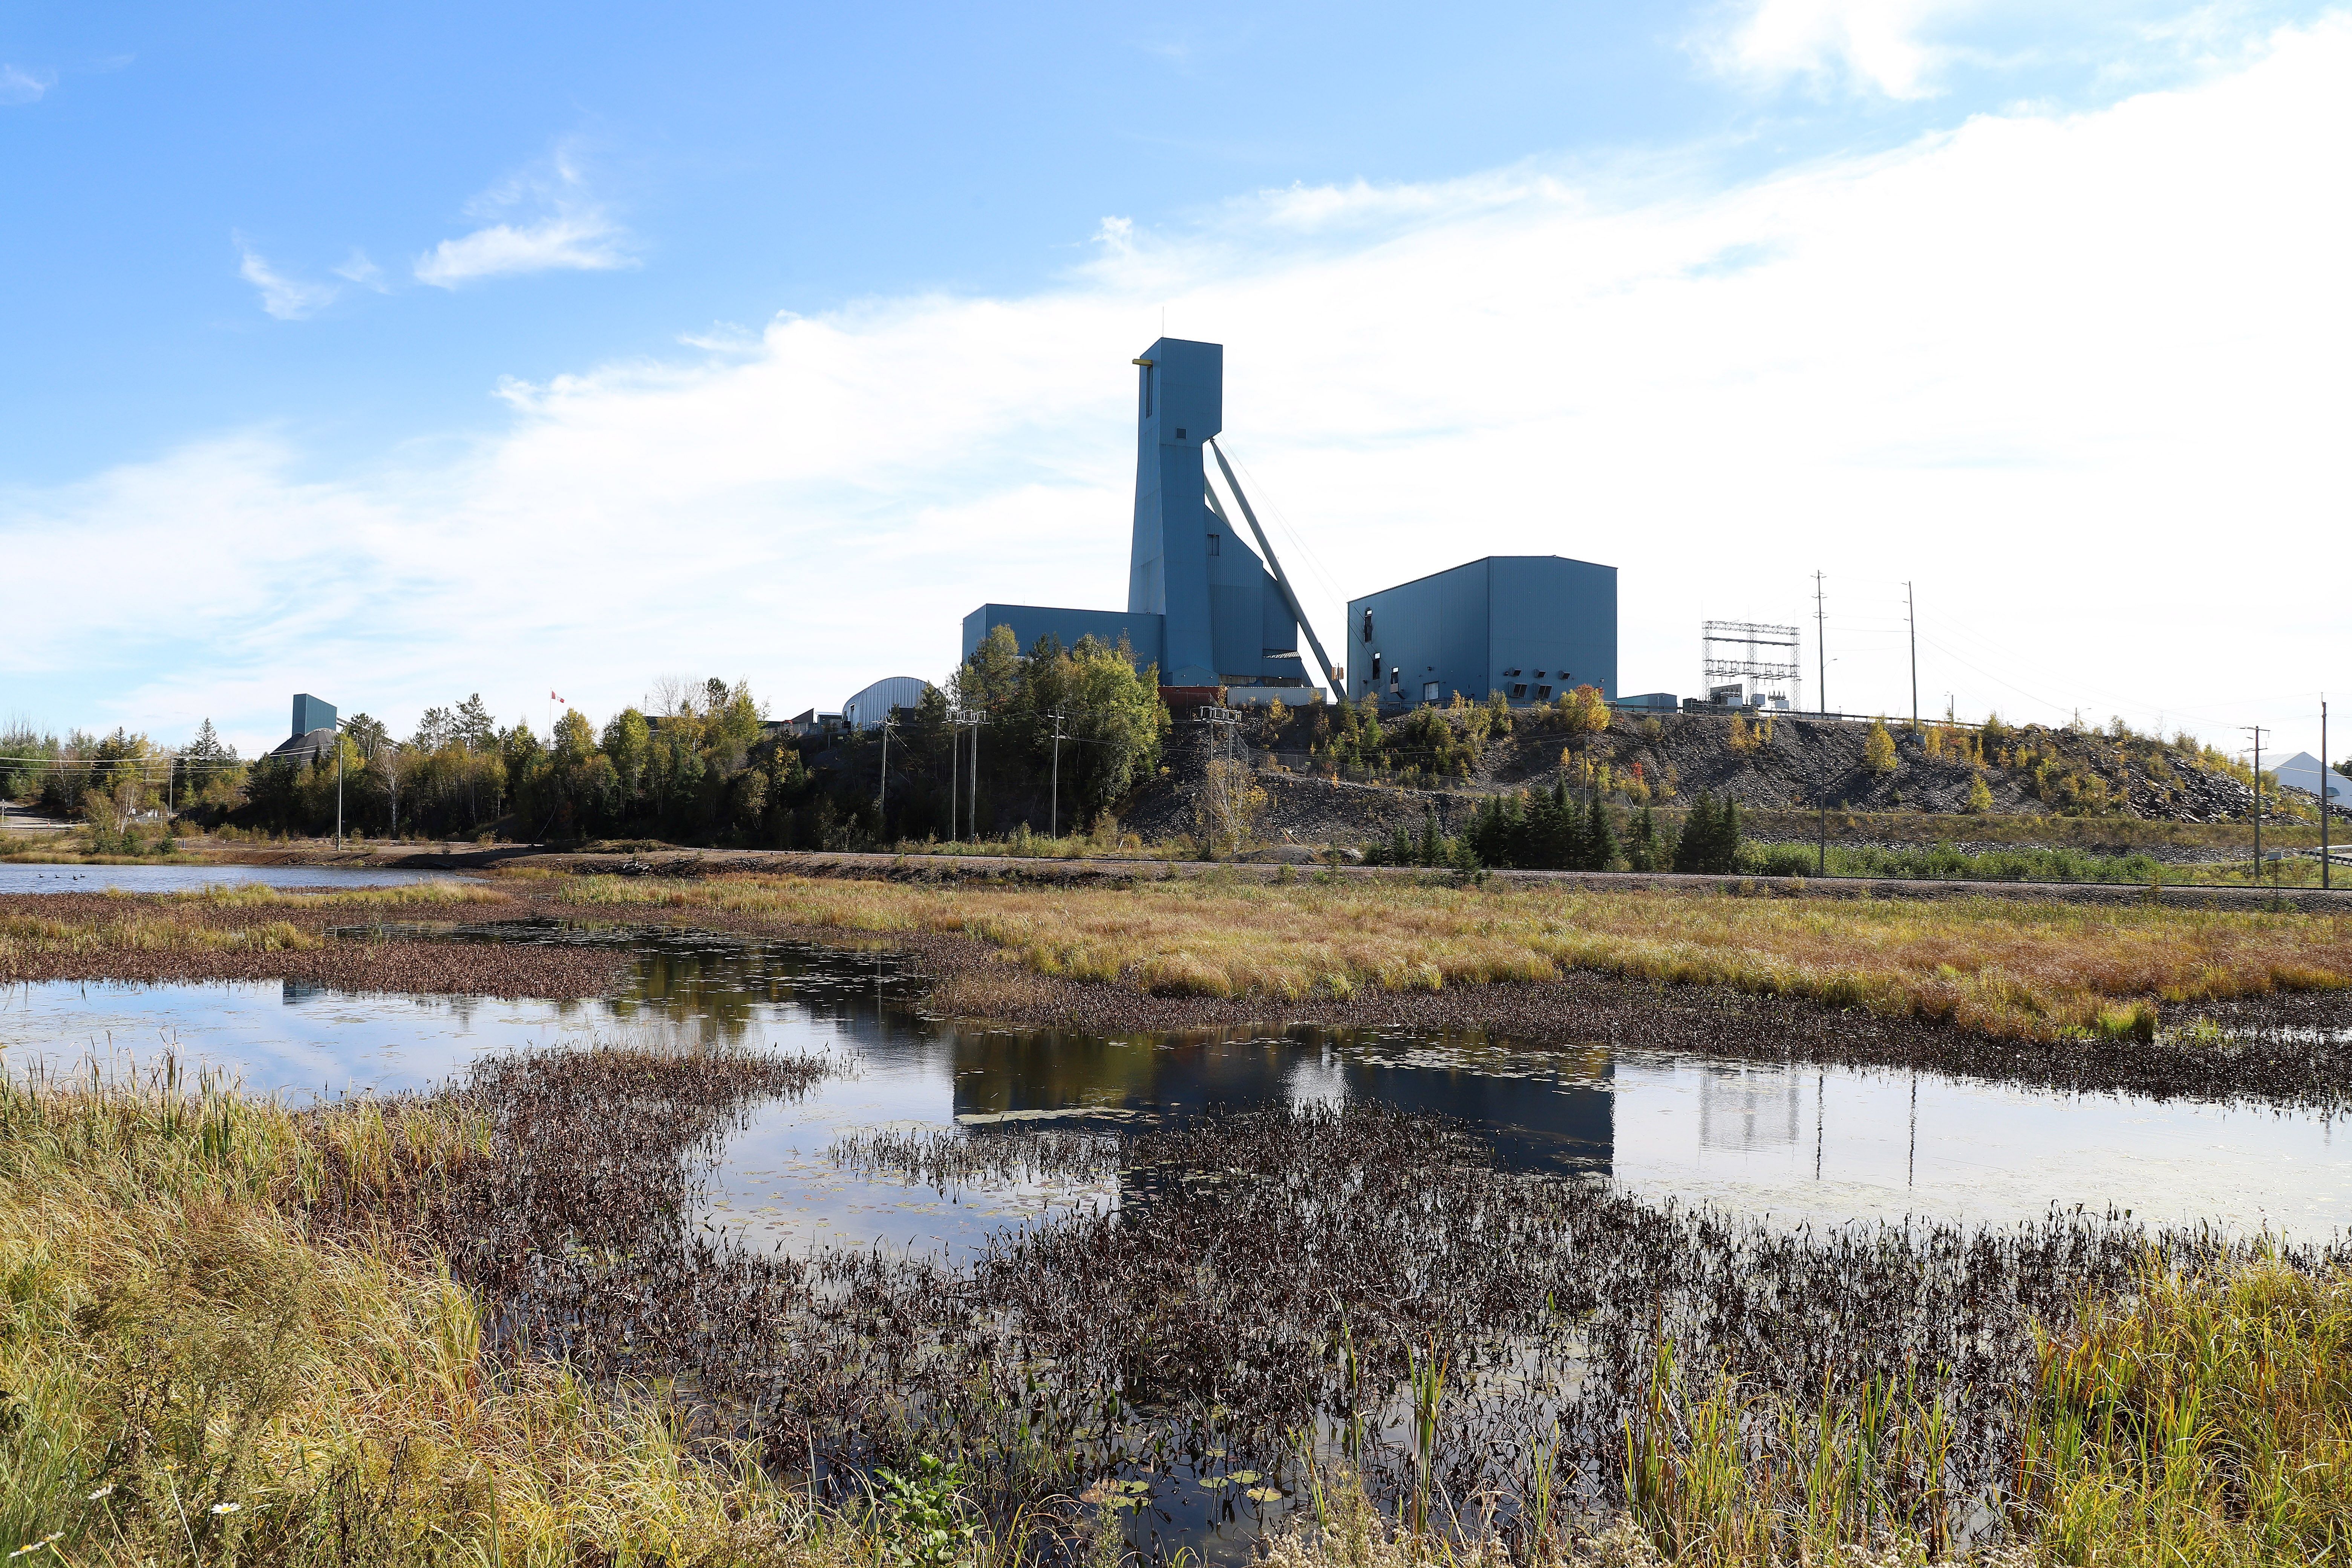 The Totten Mine near Sudbury, Ontario on Monday, 27 September 2021 where about 39 workers have been trapped since Sunday